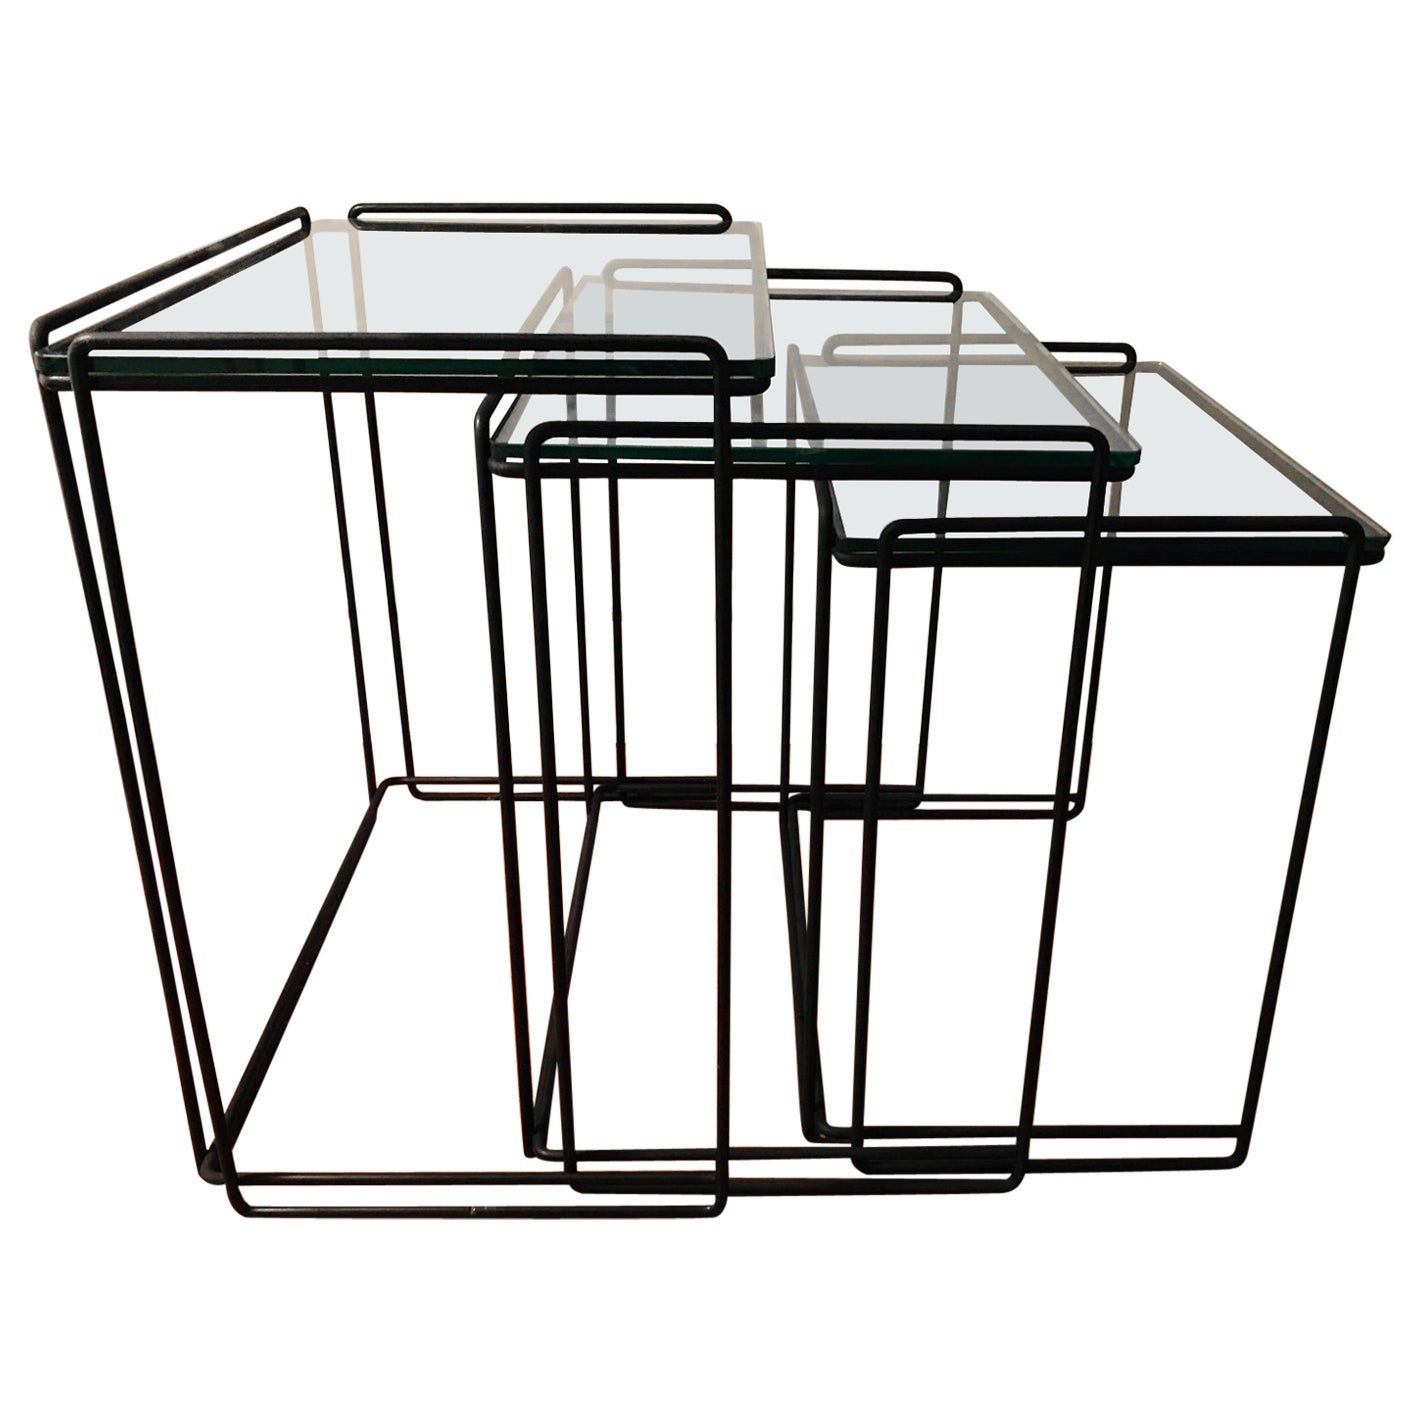 Postmodern “Isocele” Sculptural Iron Nesting Tables by Max Sauze for Attrow